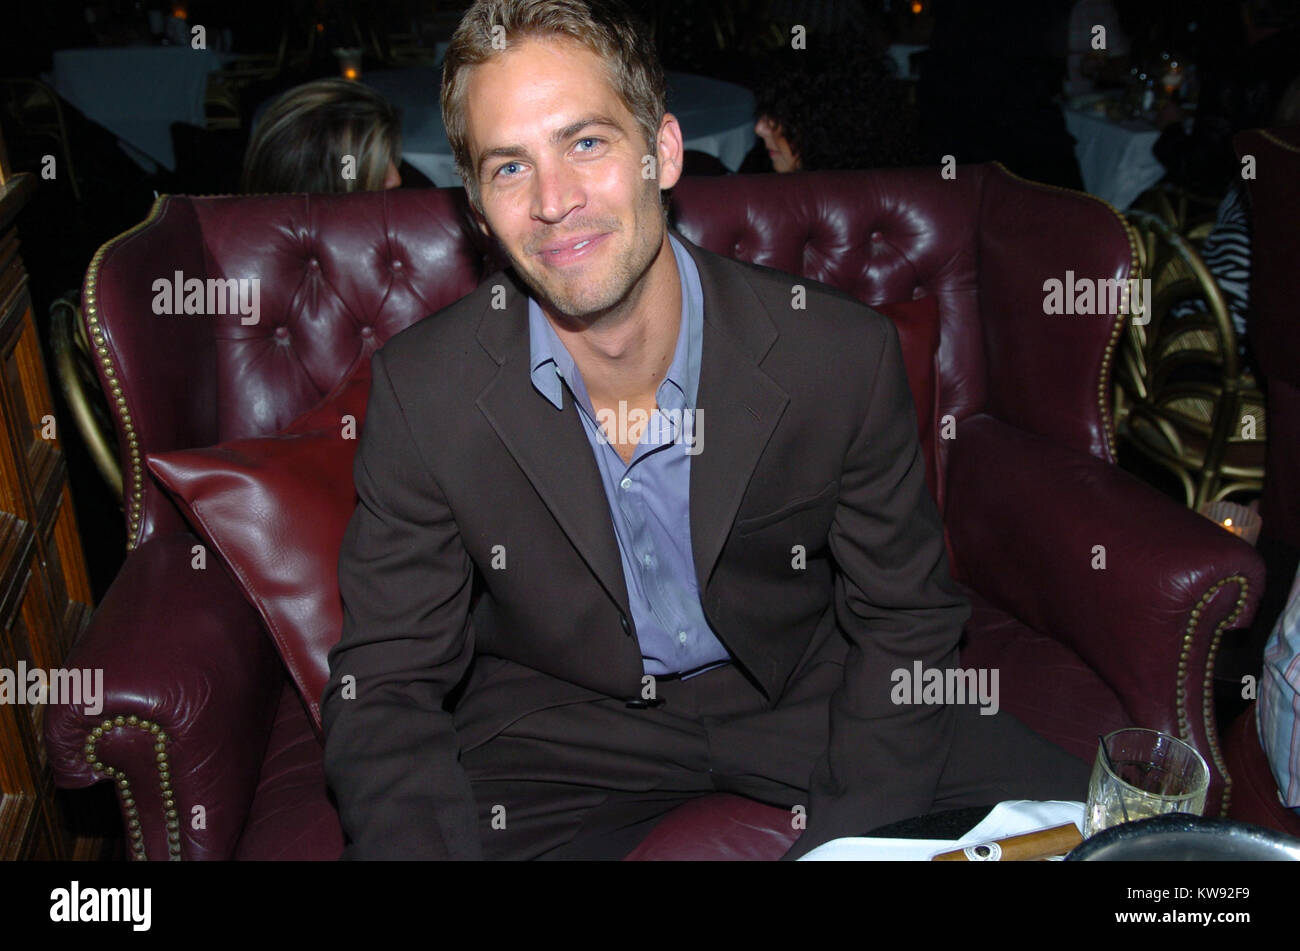 MIAMI, FL - NOVEMBER 30: Actor Paul Walker, who shot to fame as star of the high-octane street racing franchise 'Fast & Furious,' died Saturday in a car crash in Southern California. He was 40. Walker's publicist Ame van Iden confirmed his death, but said she could not elaborate beyond statements posted on Walker's official Twitter and Facebook accounts. Walker was a passenger in a friend's car and both were attending a charity event for his organization, Reach Out Worldwide, in the community of Valencia in Santa Clarita, about 30 miles north of Hollywood. The website for the charity said the  Stock Photo